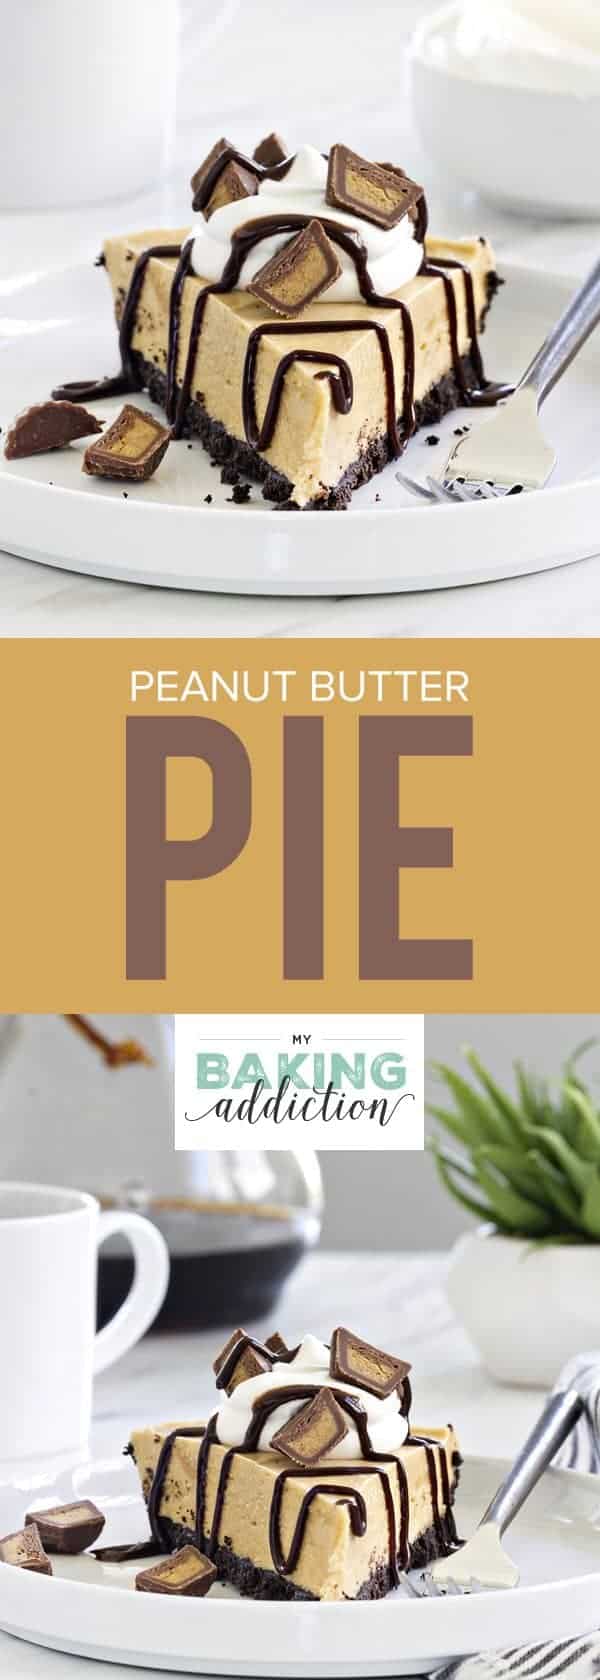 Peanut Butter Pie is made with a chocolate cookie crust and smooth, creamy peanut butter filling. So easy and so delicious! Your guests will be begging you for this recipe!